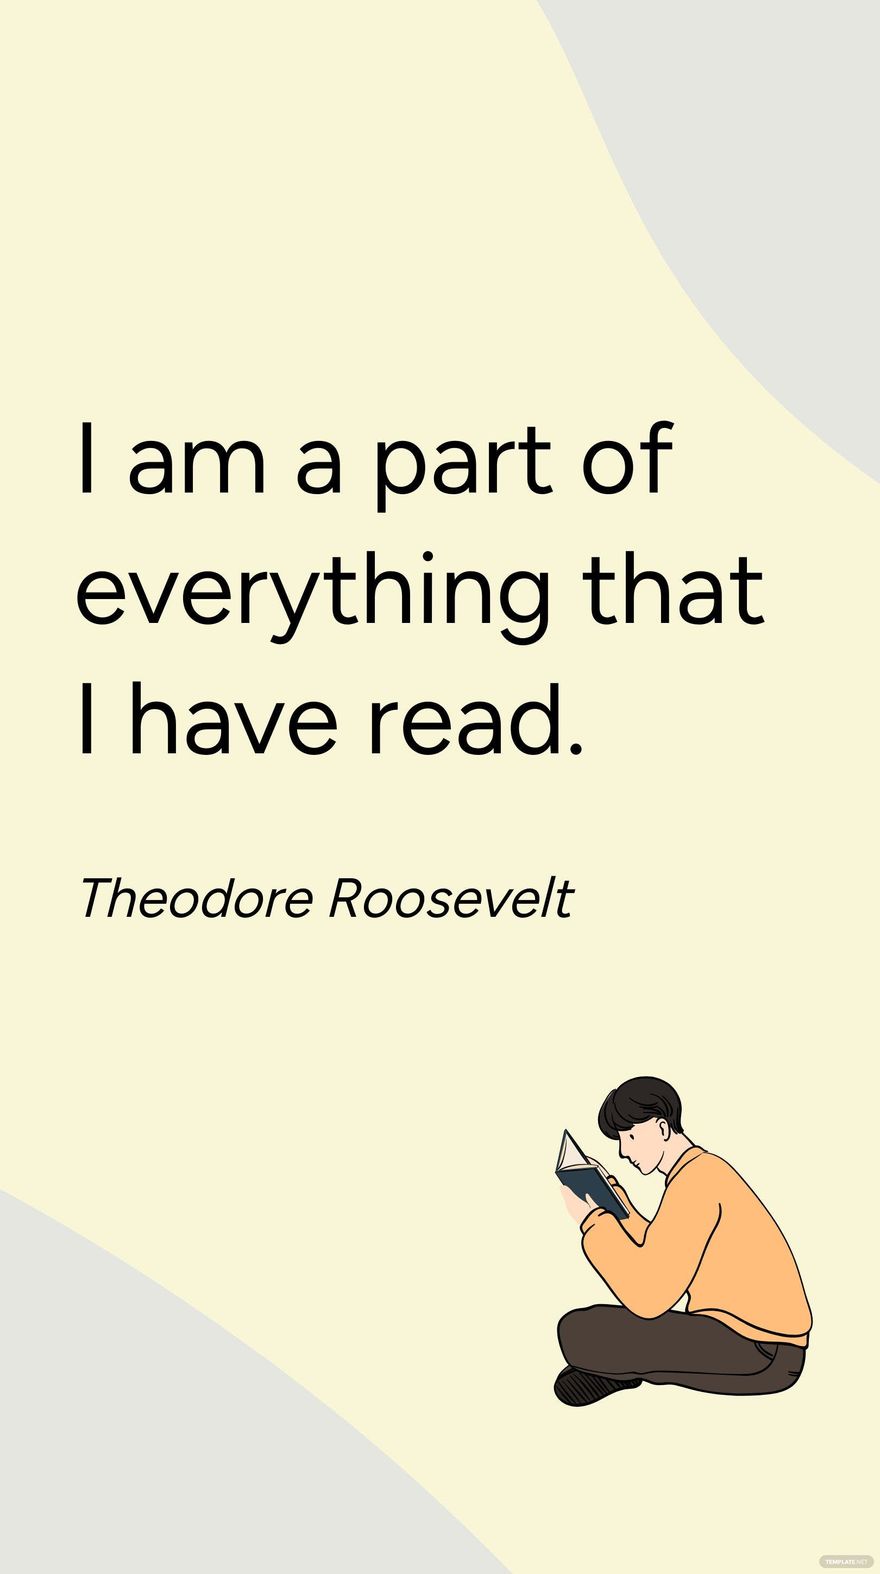 Theodore Roosevelt -I am a part of everything that I have read.